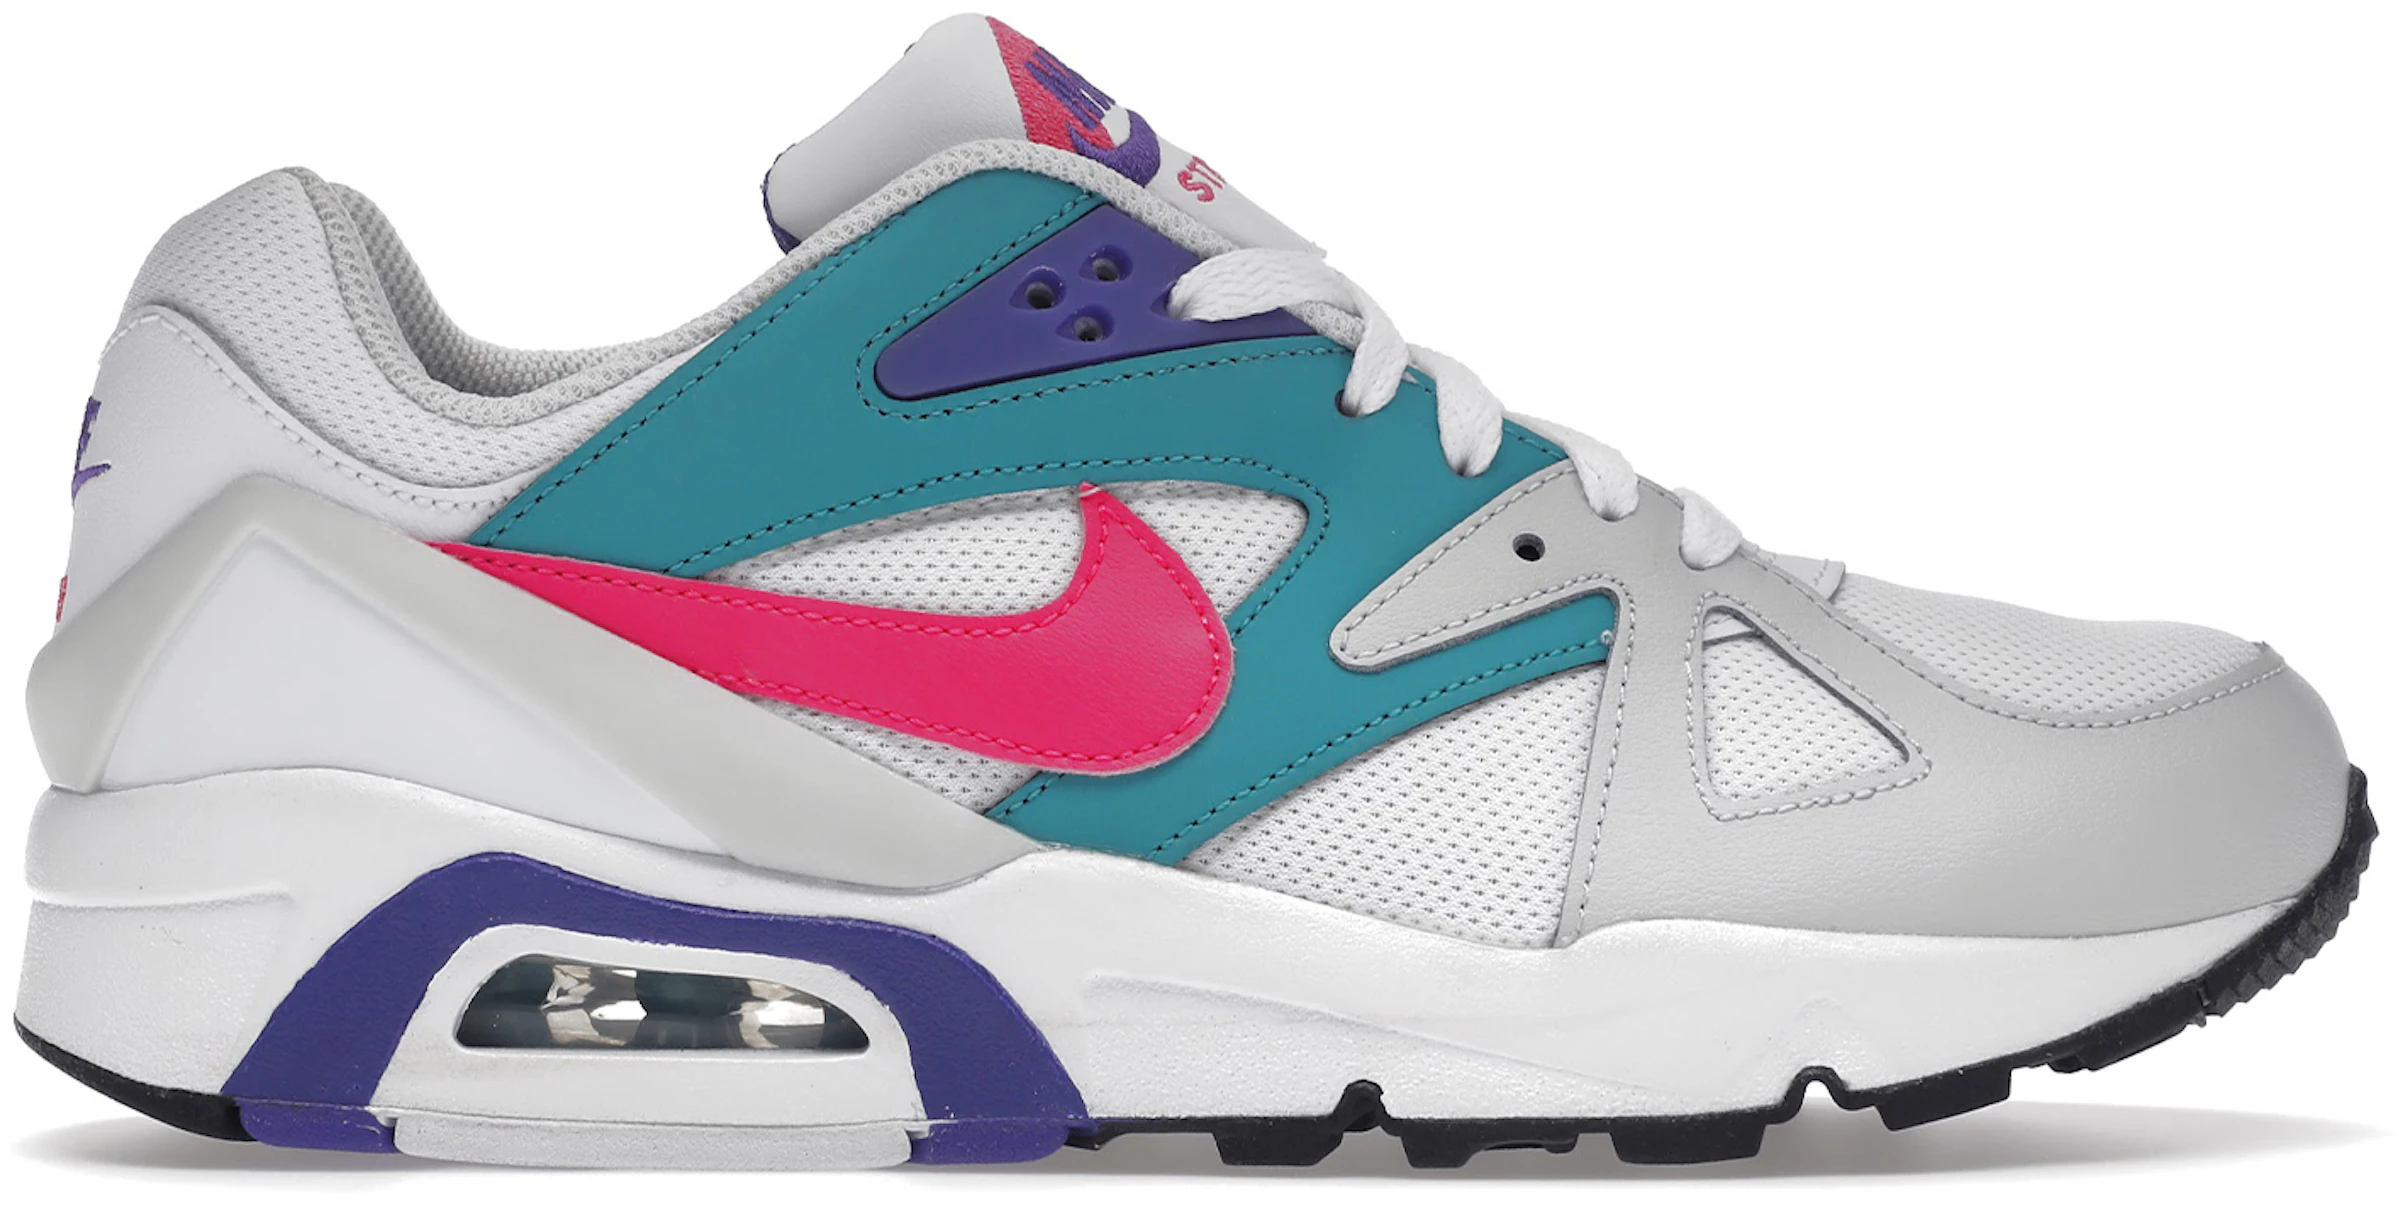 Nike Air Structure Triax 91 White Teal Pink - CZ1529-100 - US